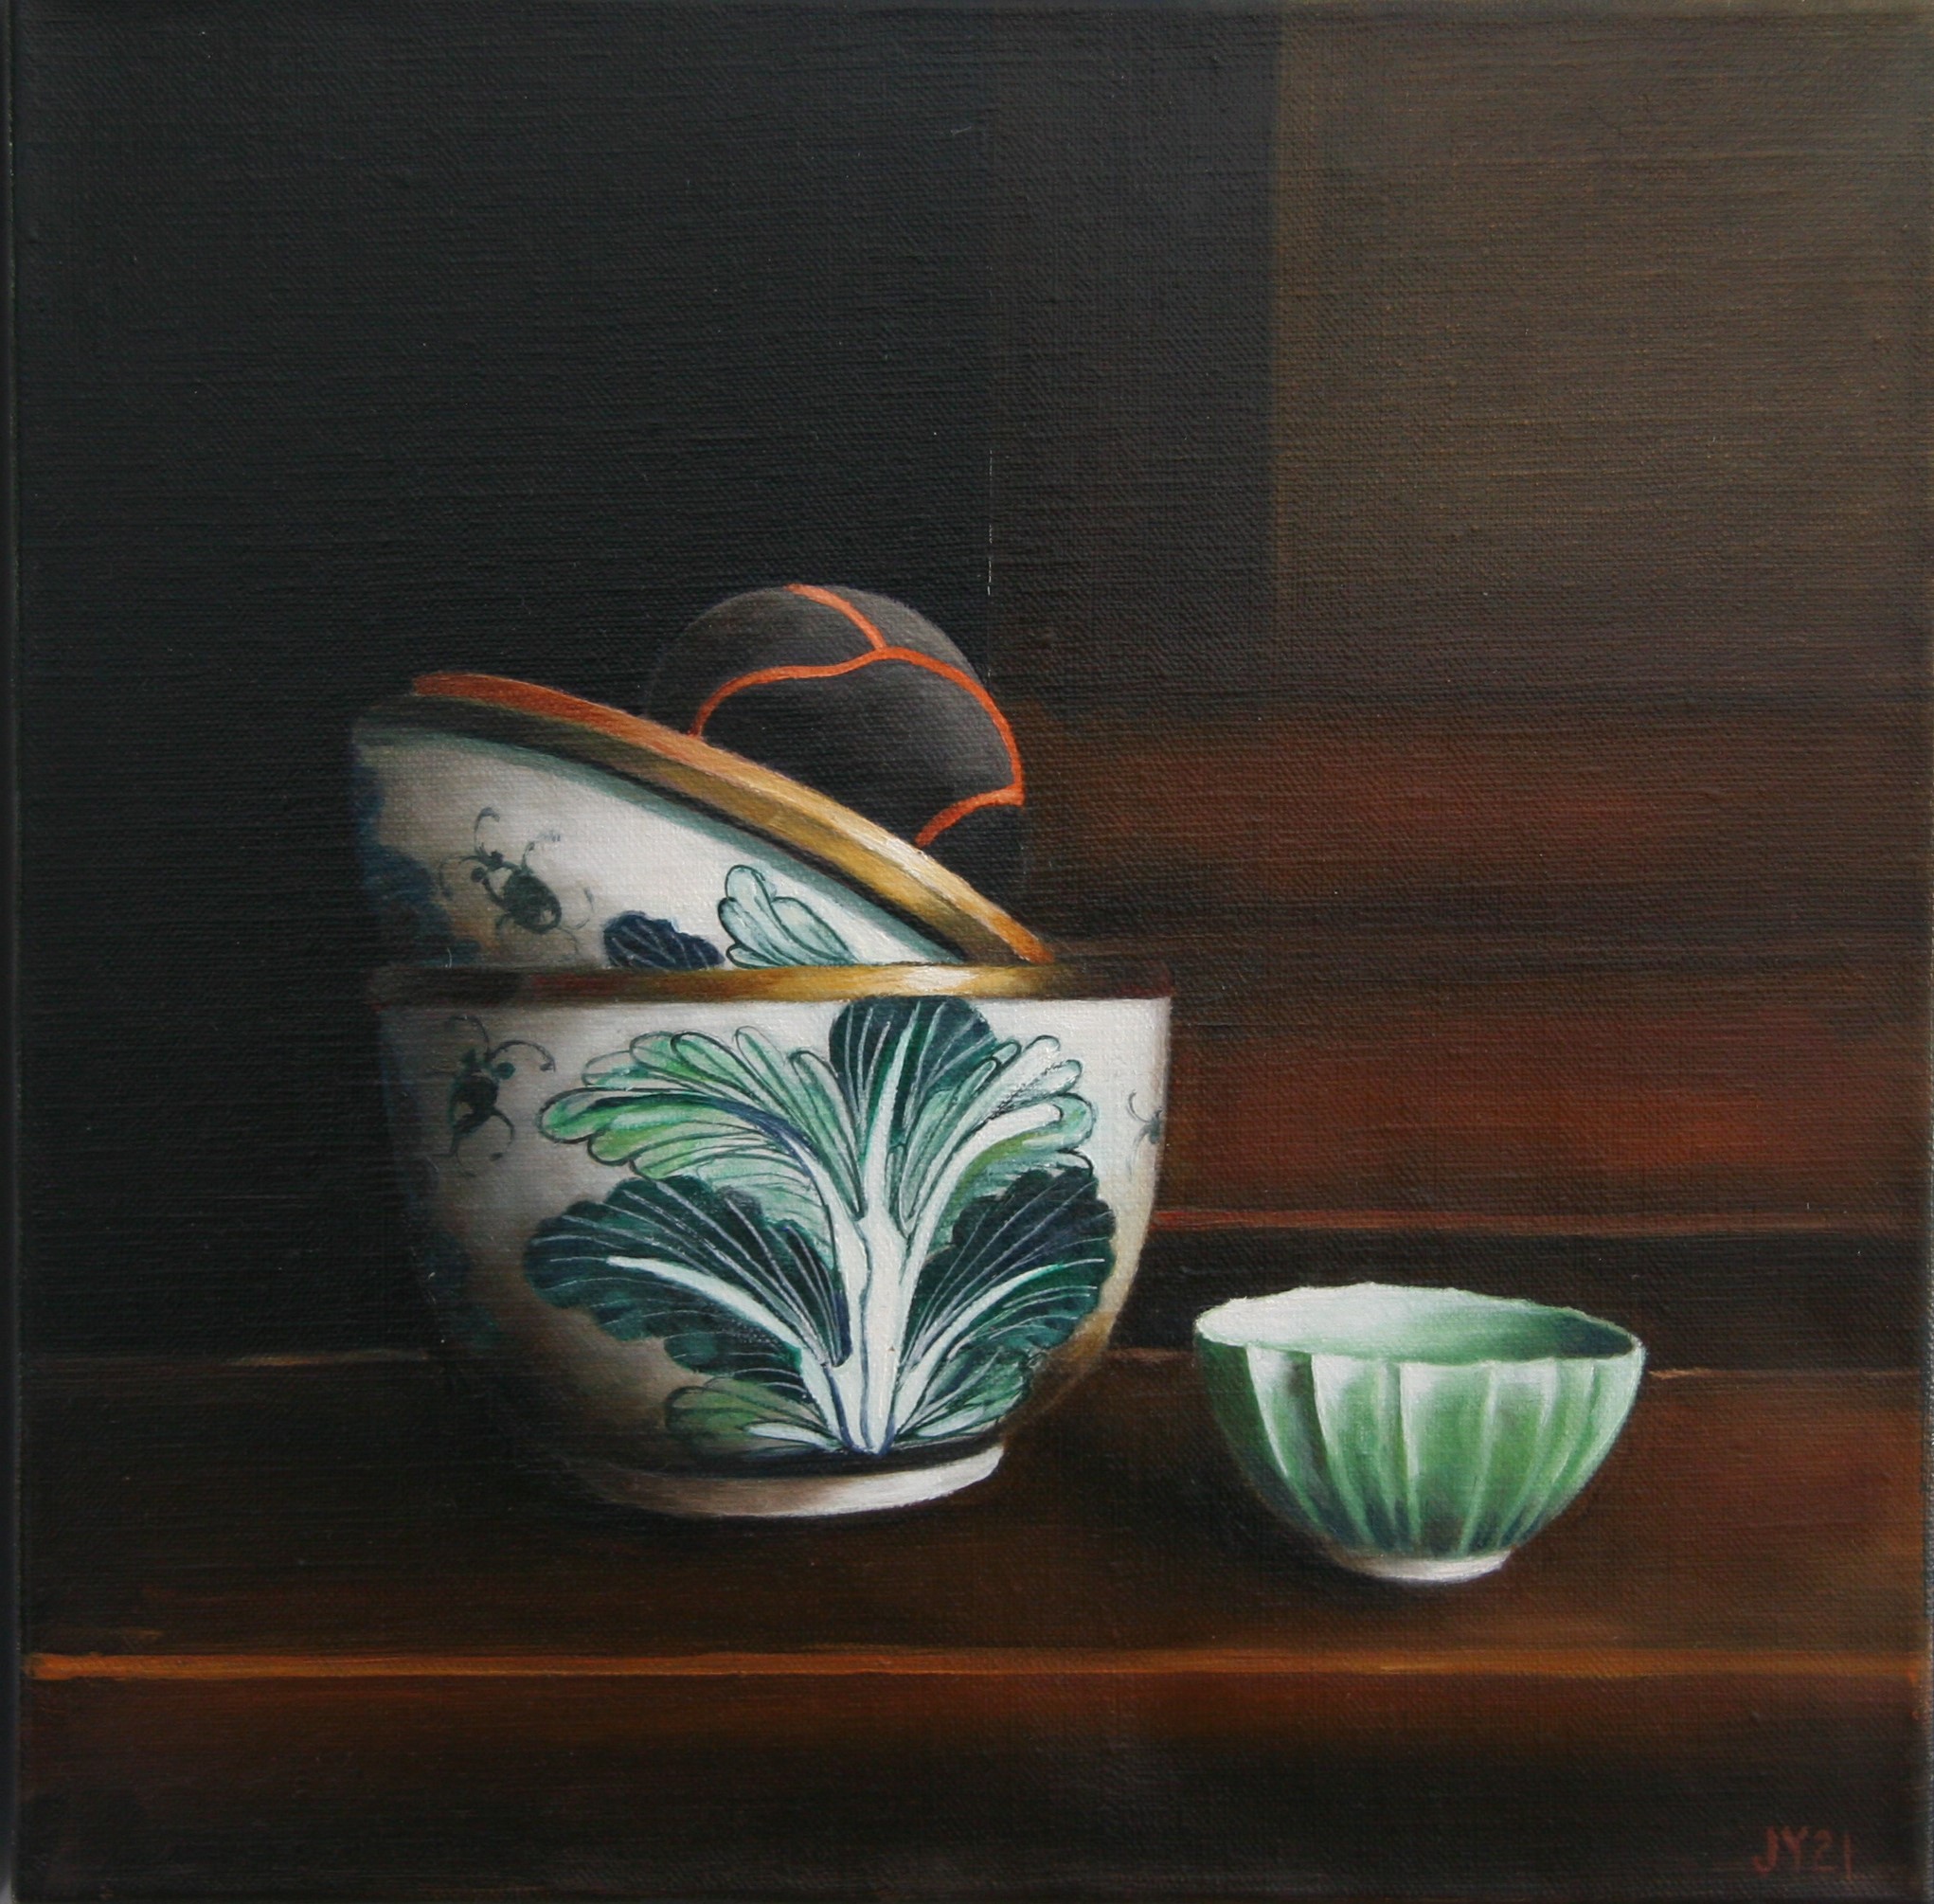 Young- Oriental Vessel, Decorated Ground - Oil on Linen - 30 x 30cm